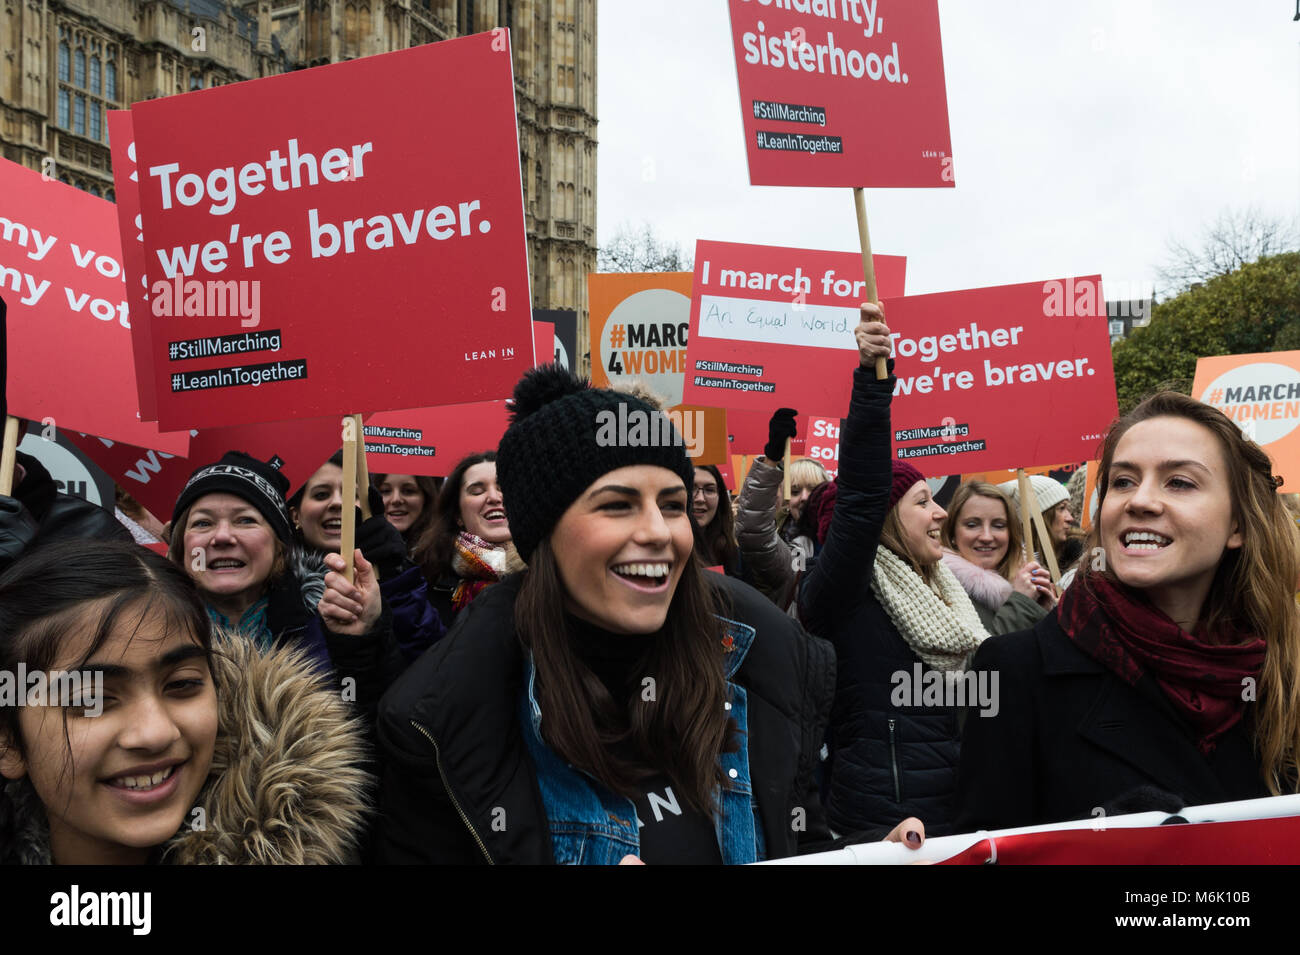 London, UK. 4th March, 2018. Thousands of people including politicians, celebrities and activists gather at Old Palace Yard outside the Houses of Parliament in London to take part in March4Women, an annual event to celebrate International Women's Day and 100 years since women in the UK first gained the right to vote. The event, organised by CARE International, aims to highlight inequality faced by women and girls around the world and campaign for gender equality and women's rights worldwide. Credit: Wiktor Szymanowicz/Alamy Live News Stock Photo